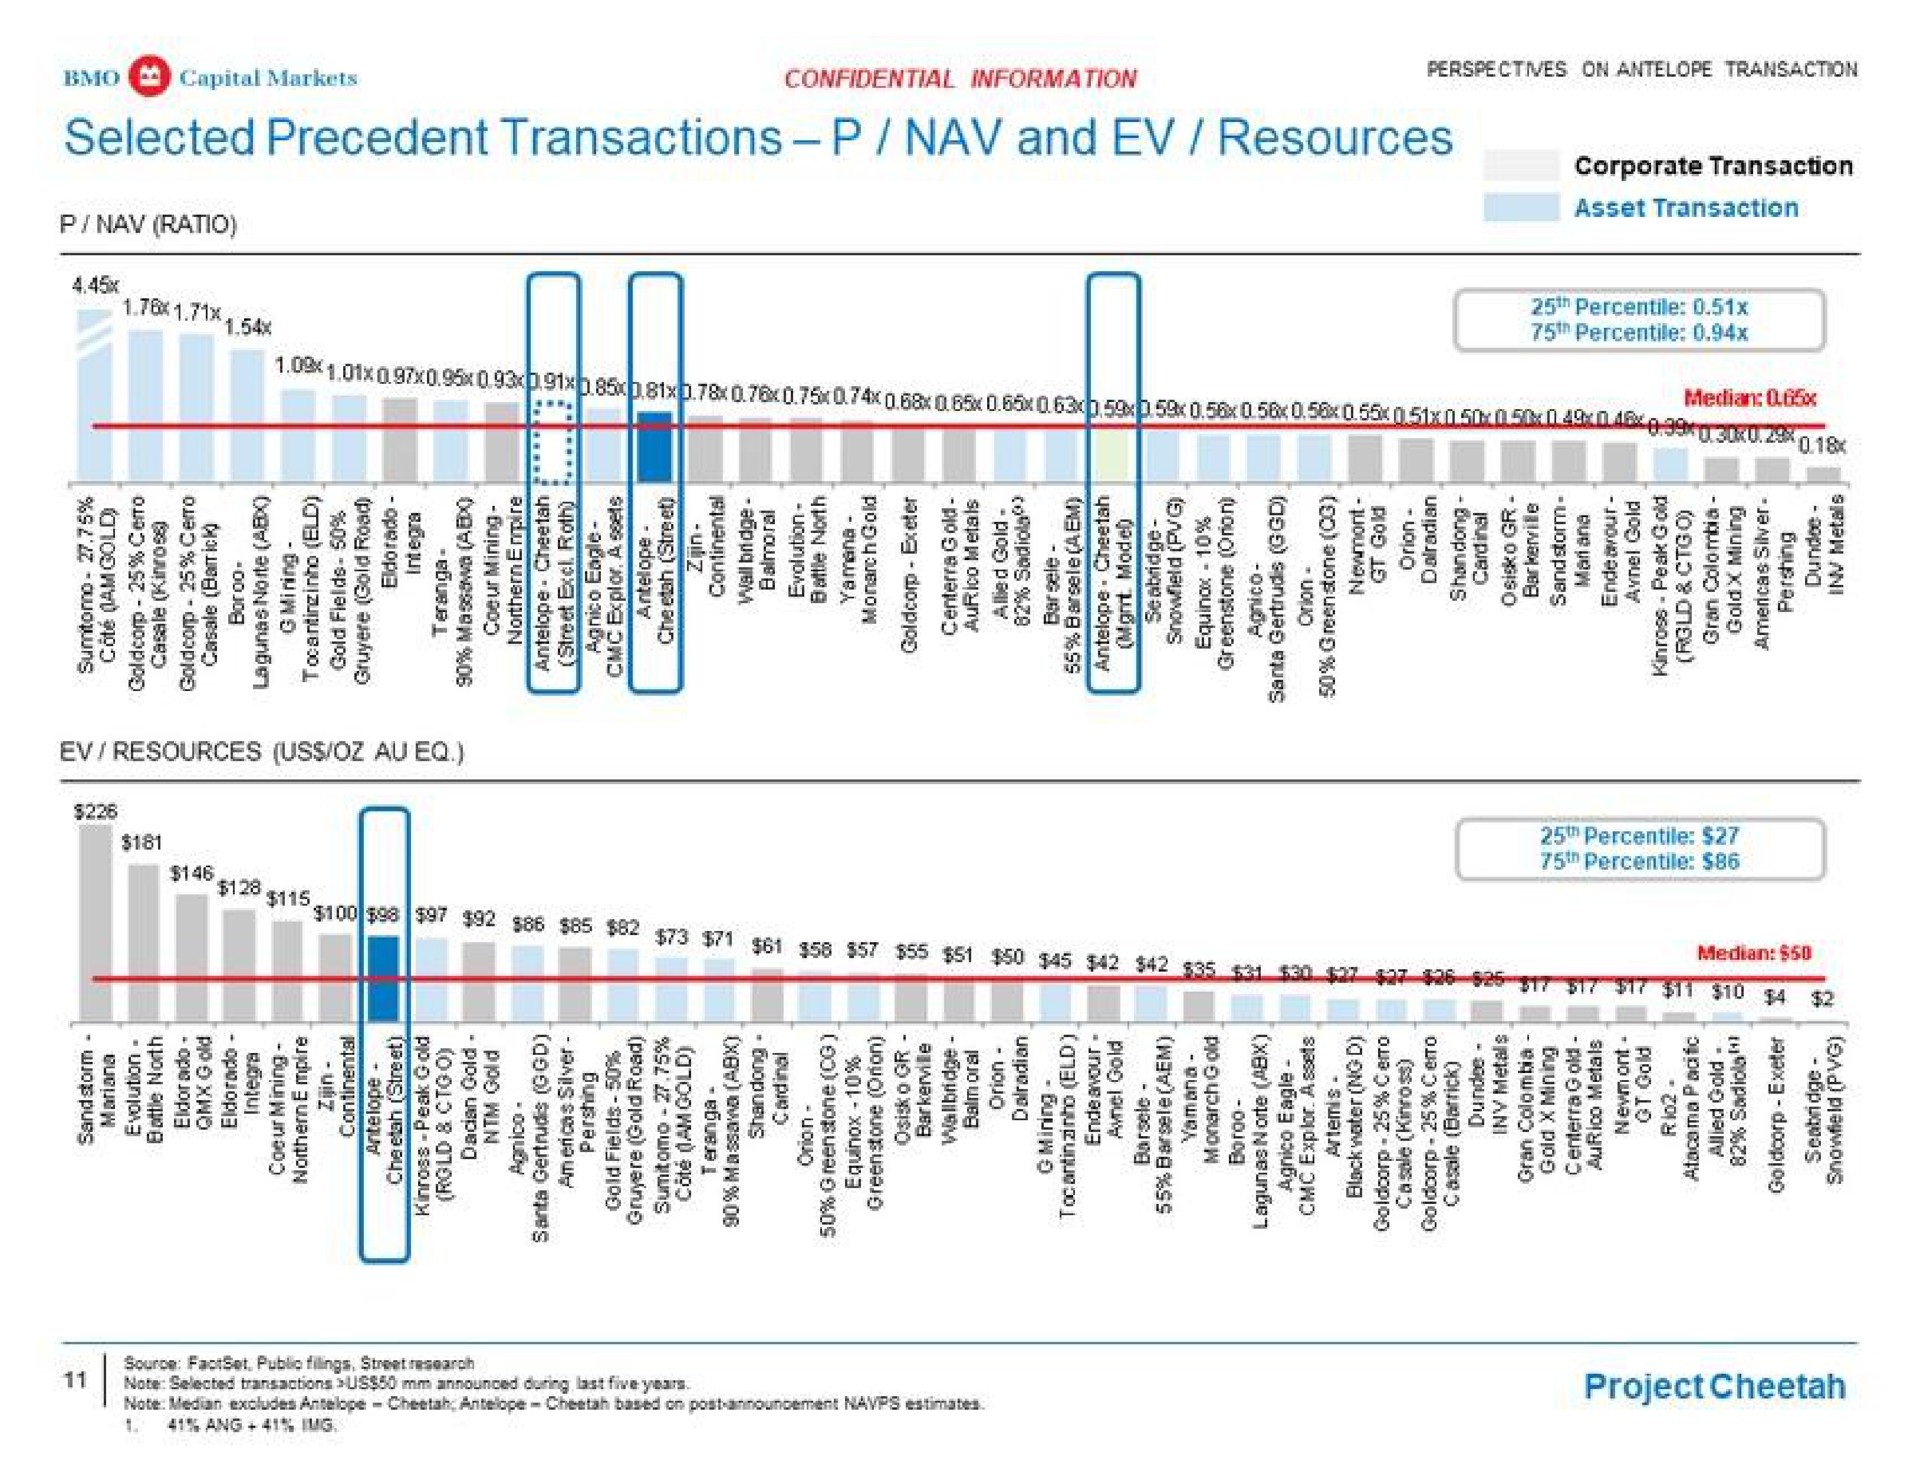 selected precedent transactions and resources vie | BMO Capital Markets